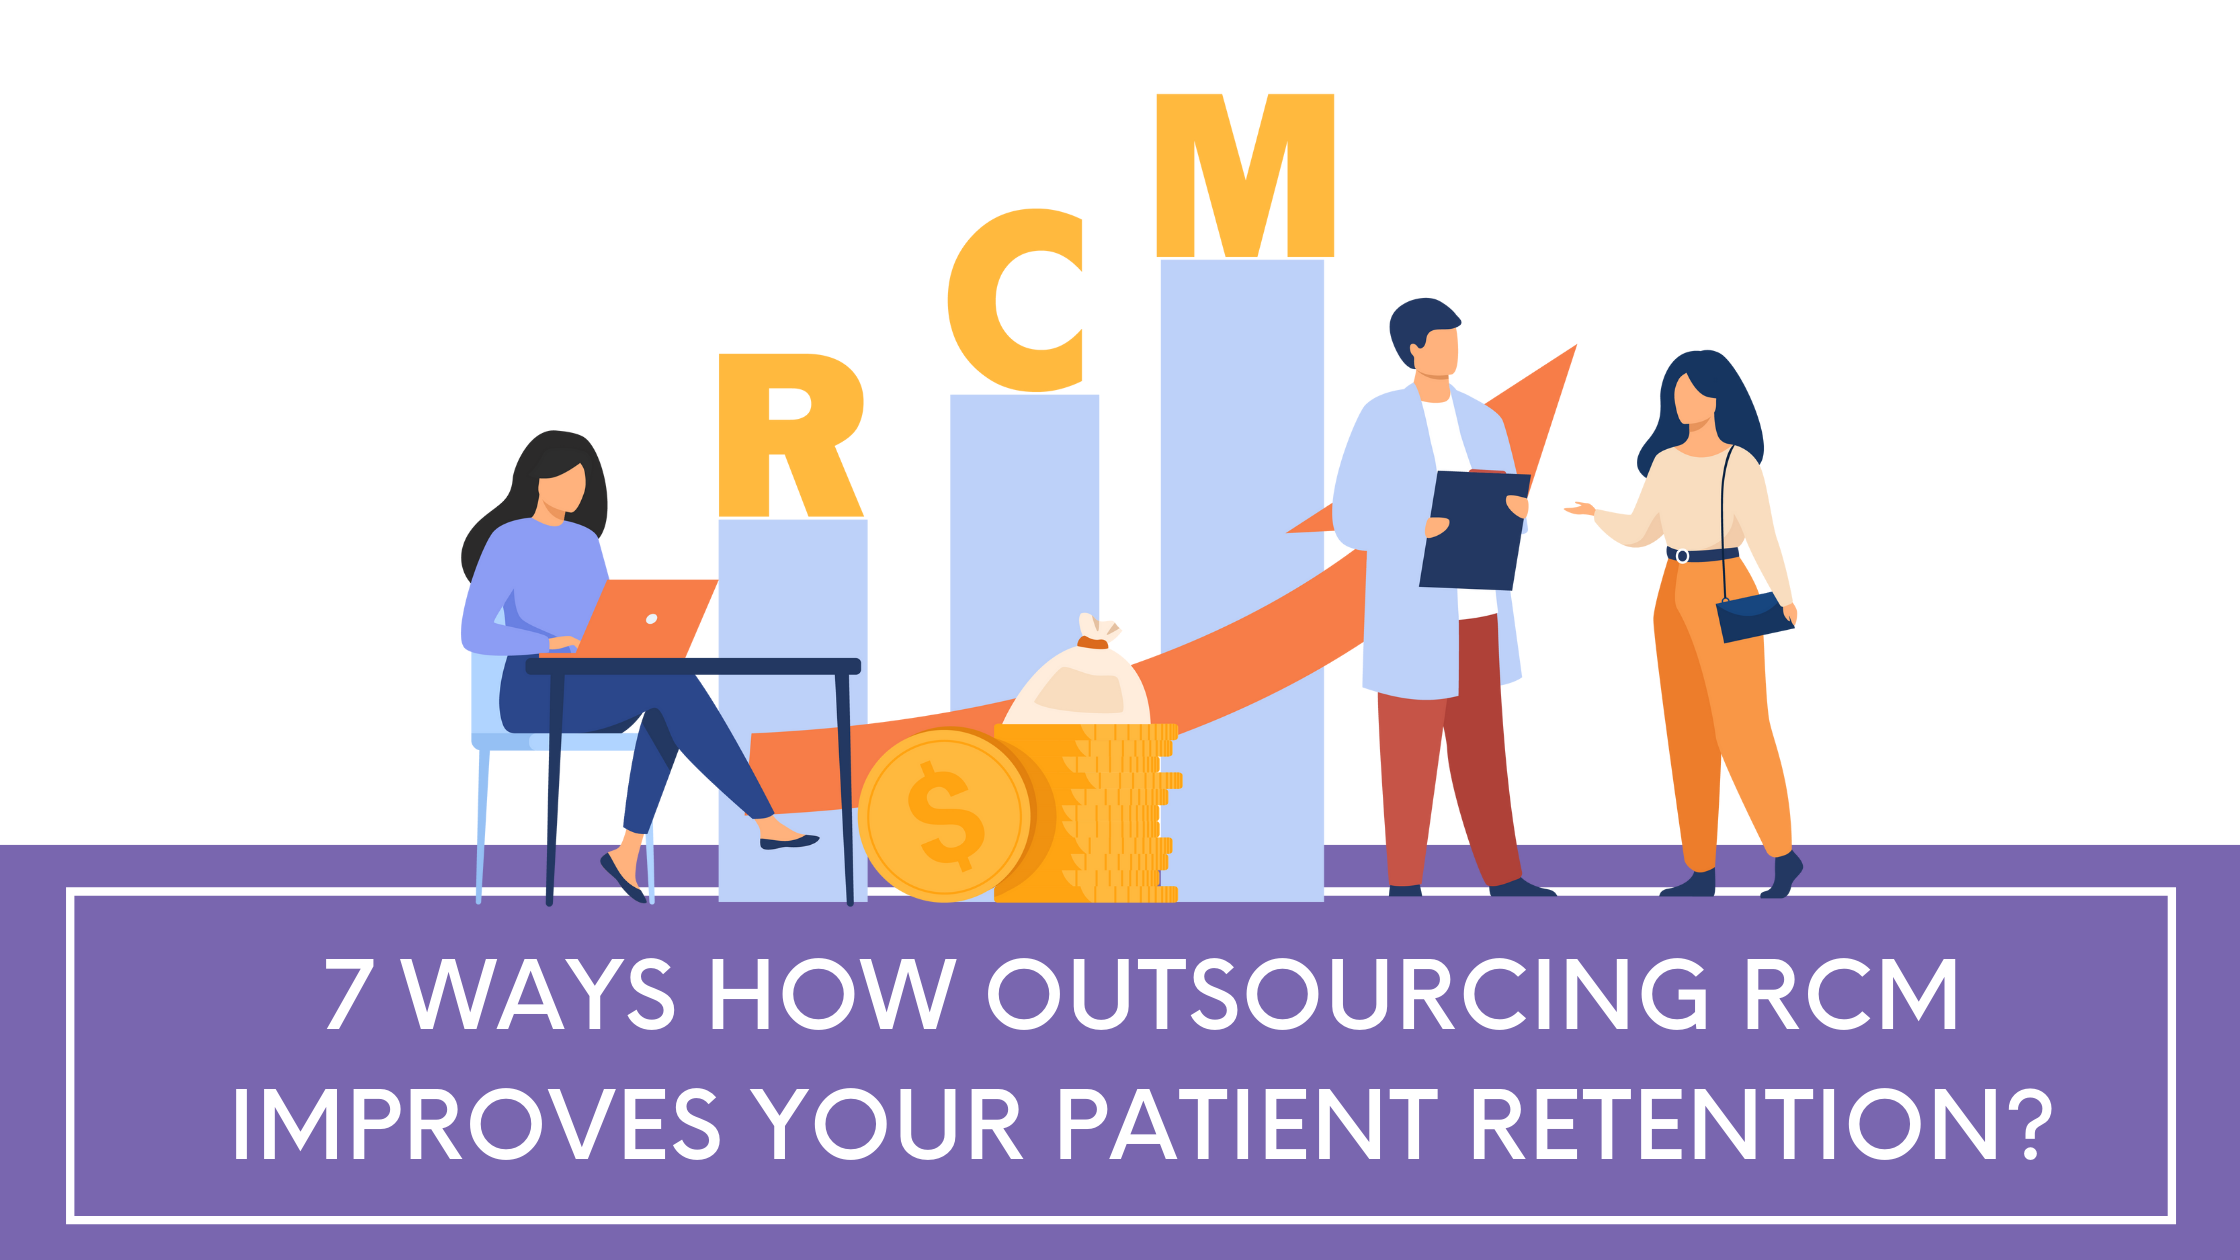 7 ways-outsourcing-rcm